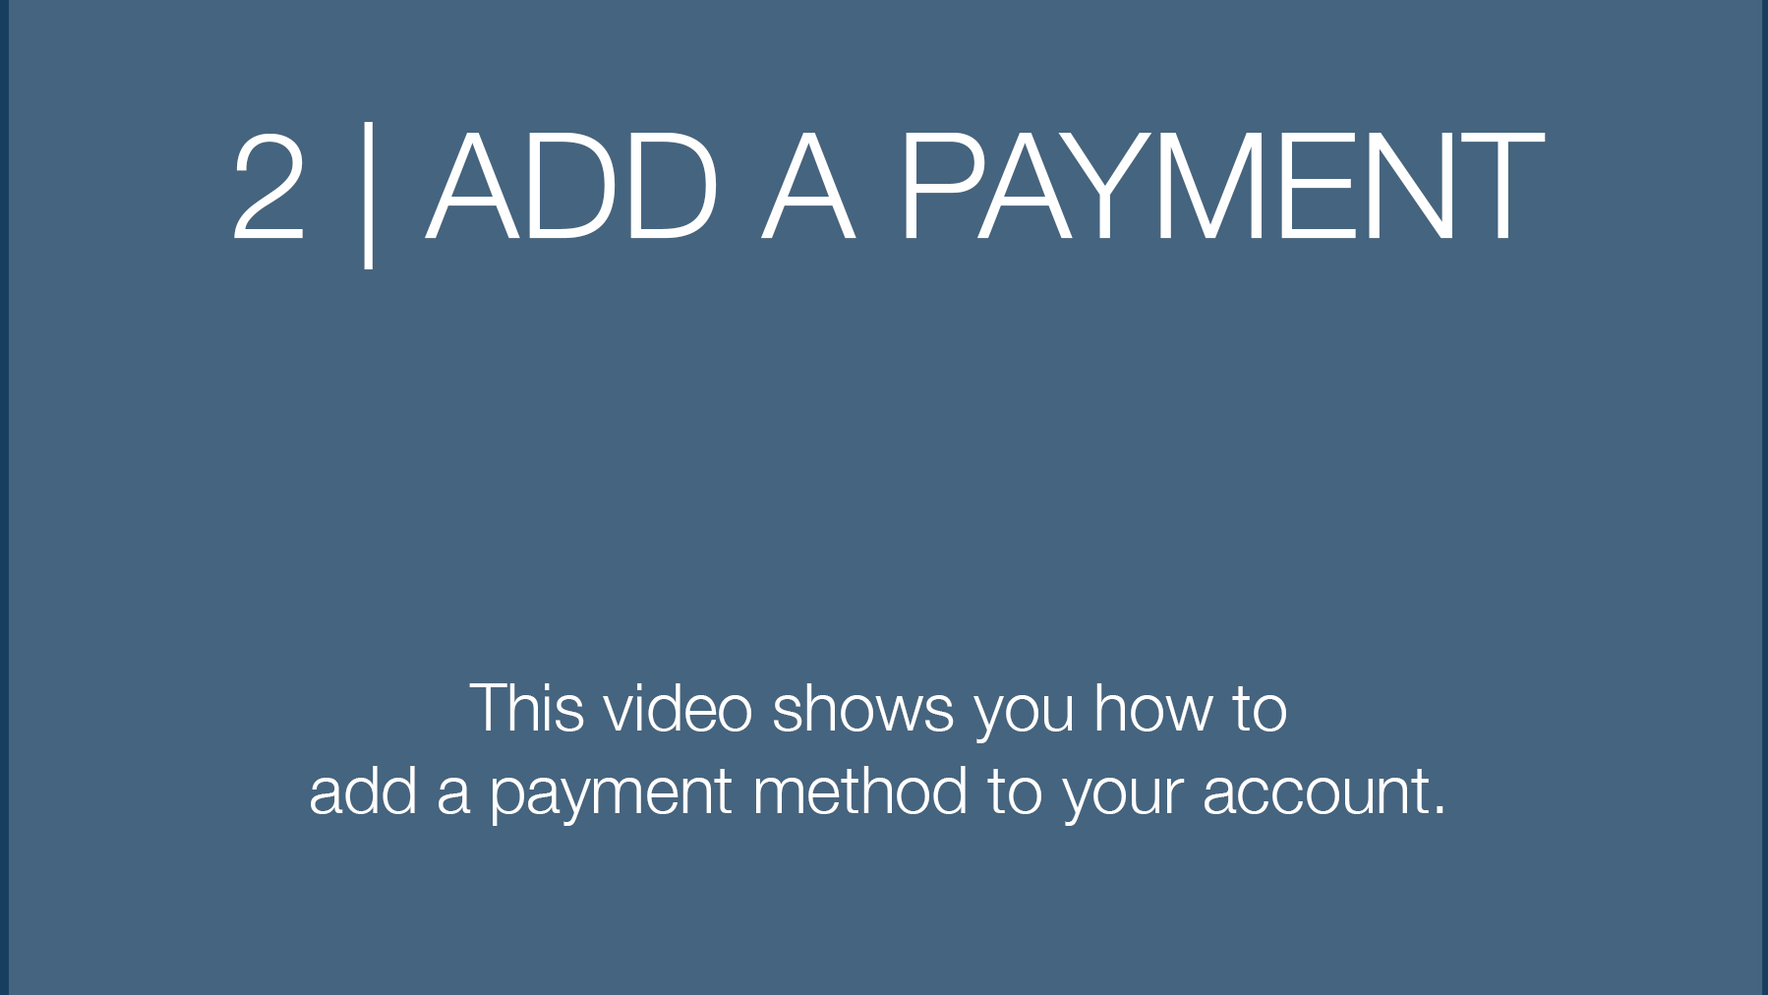 2 | HOW TO ADD A PAYMENT TO YOUR ACCOUNT